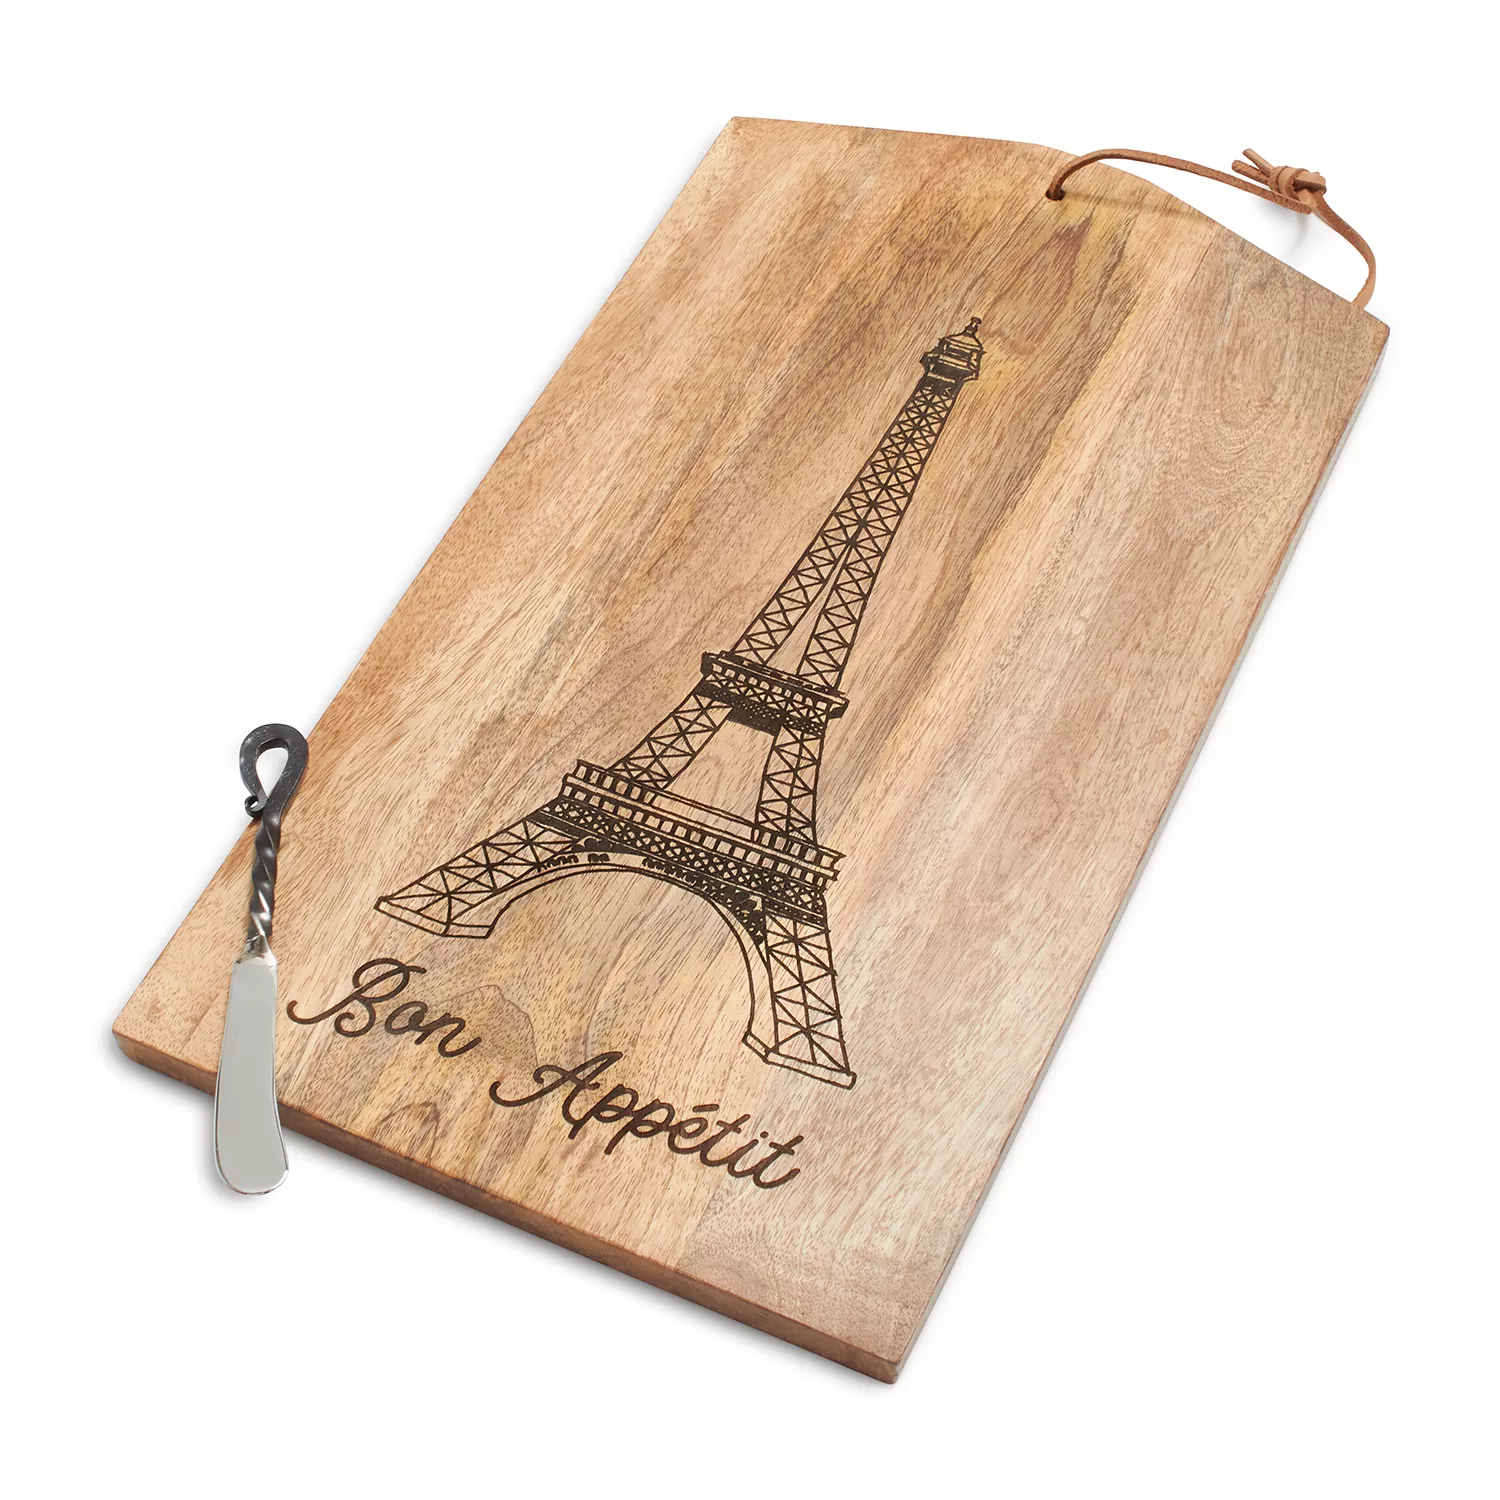 Sur La Table Eiffel Tower Cheese Board and Spreader Set